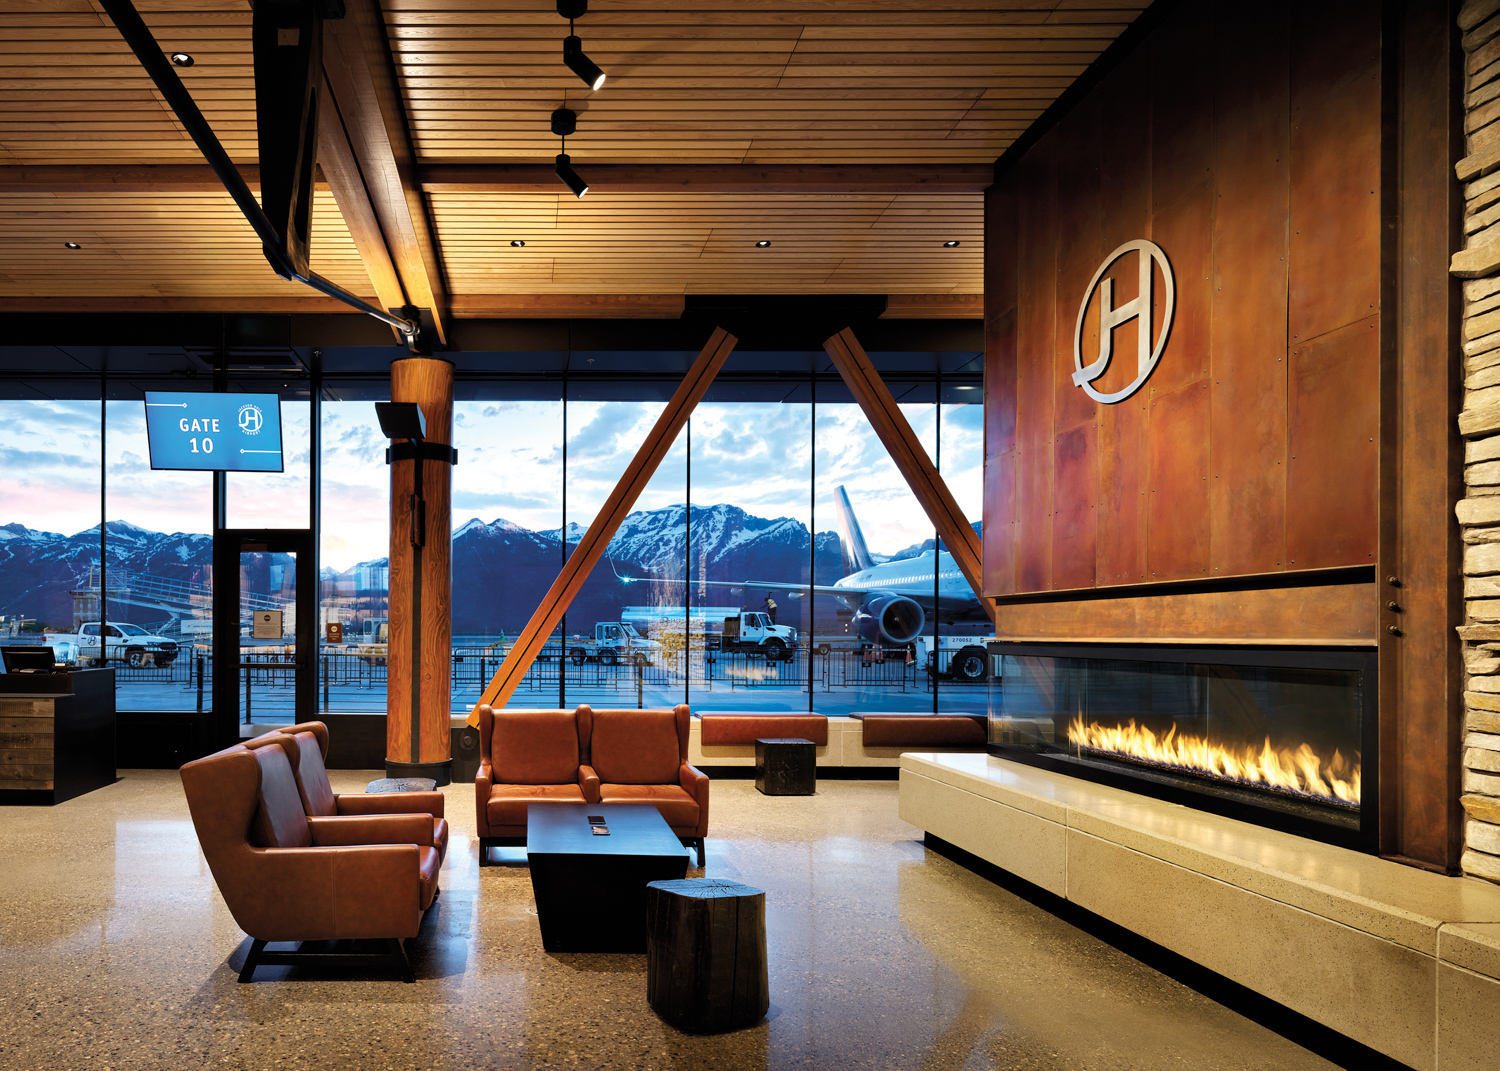 Jackson Hole Airport gate with leather armchairs facing a large fireplace set into a wall with metal panels